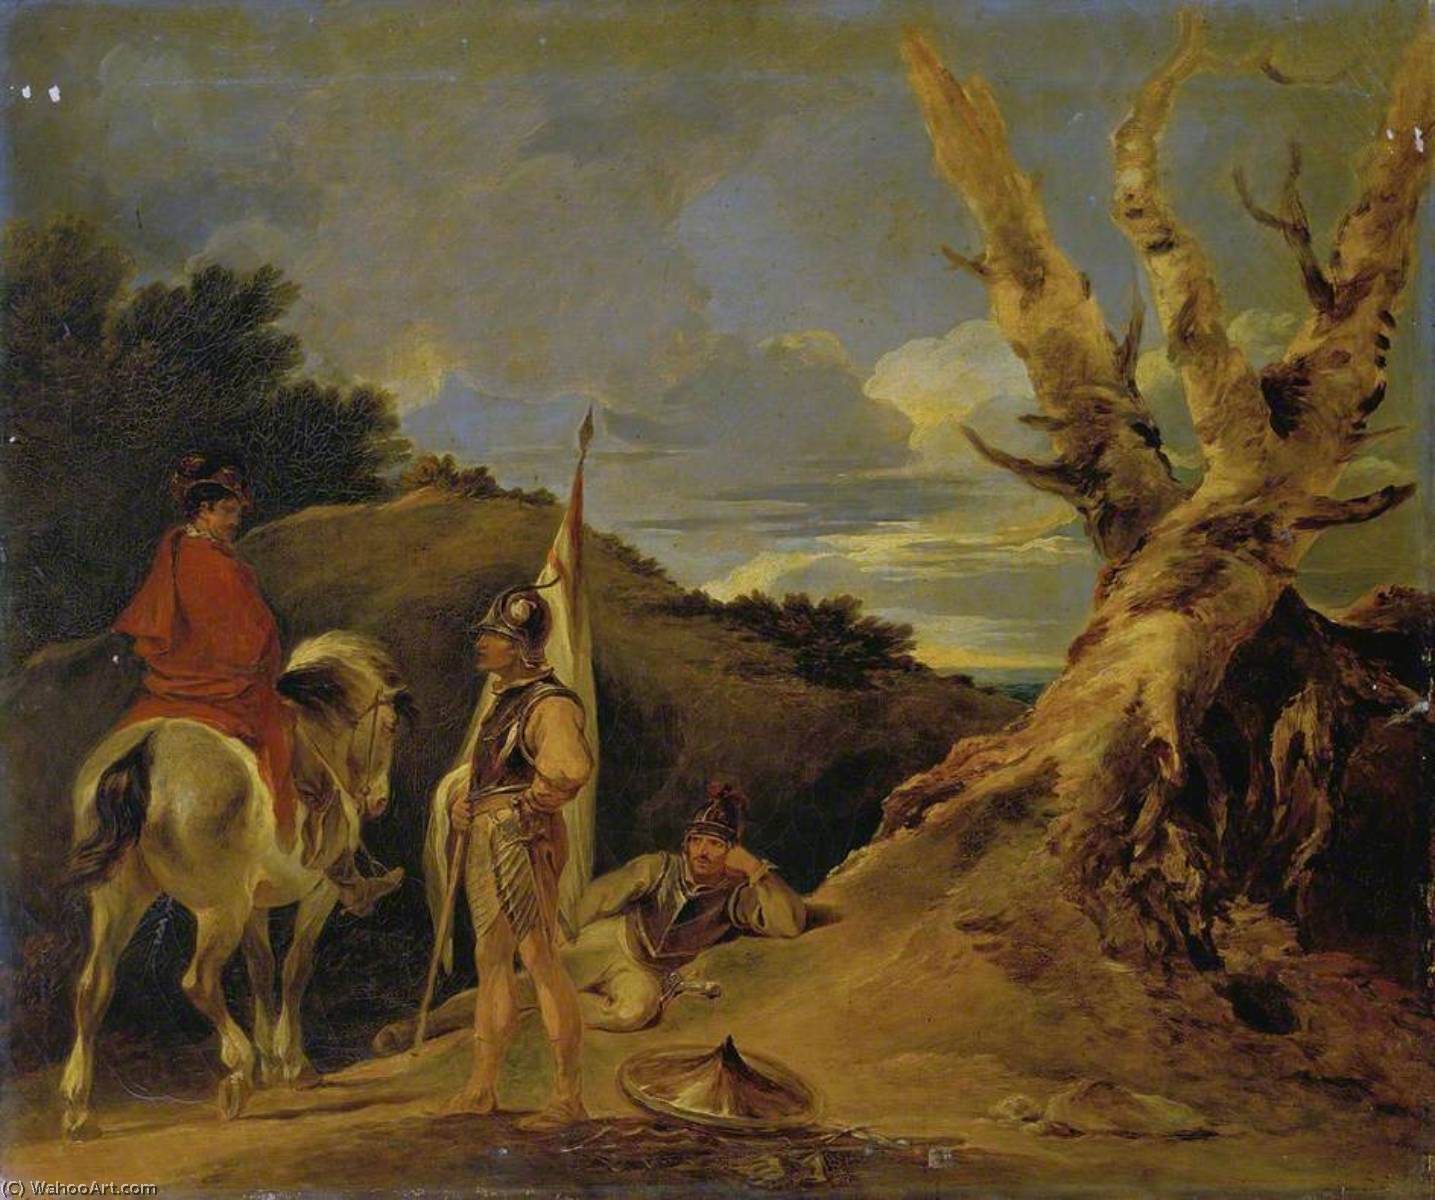 Order Art Reproductions Landscape with Soldiers, 1811 by Peter Francis Bourgeois (1753-1811) | ArtsDot.com